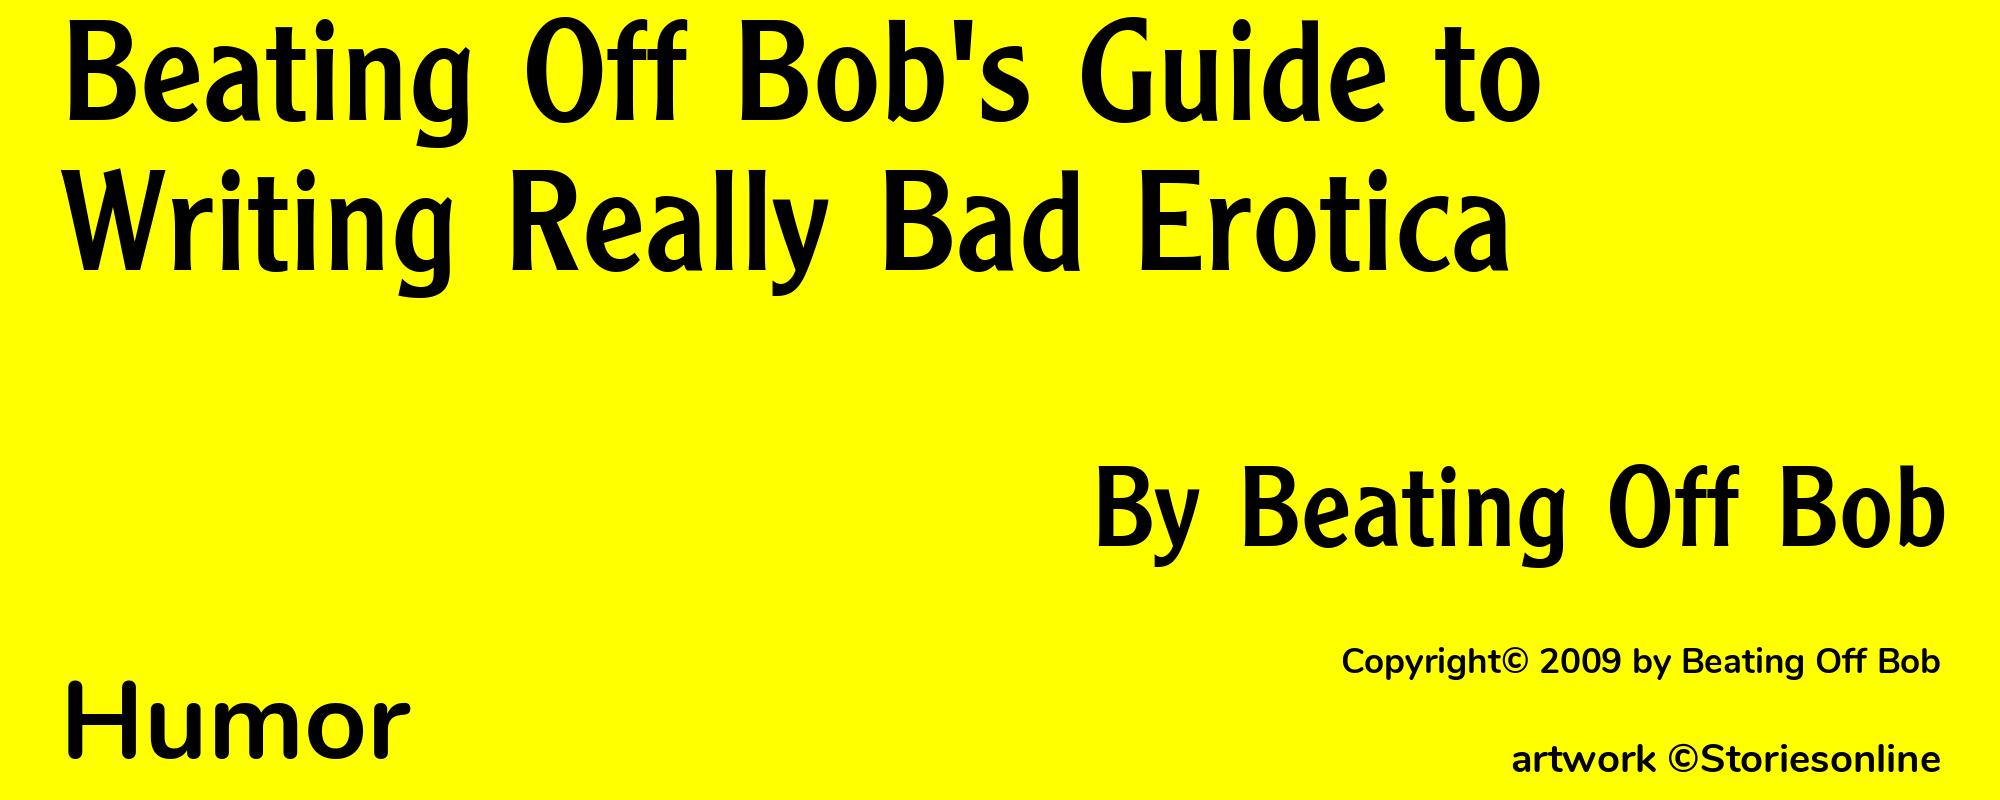 Beating Off Bob's Guide to Writing Really Bad Erotica - Cover